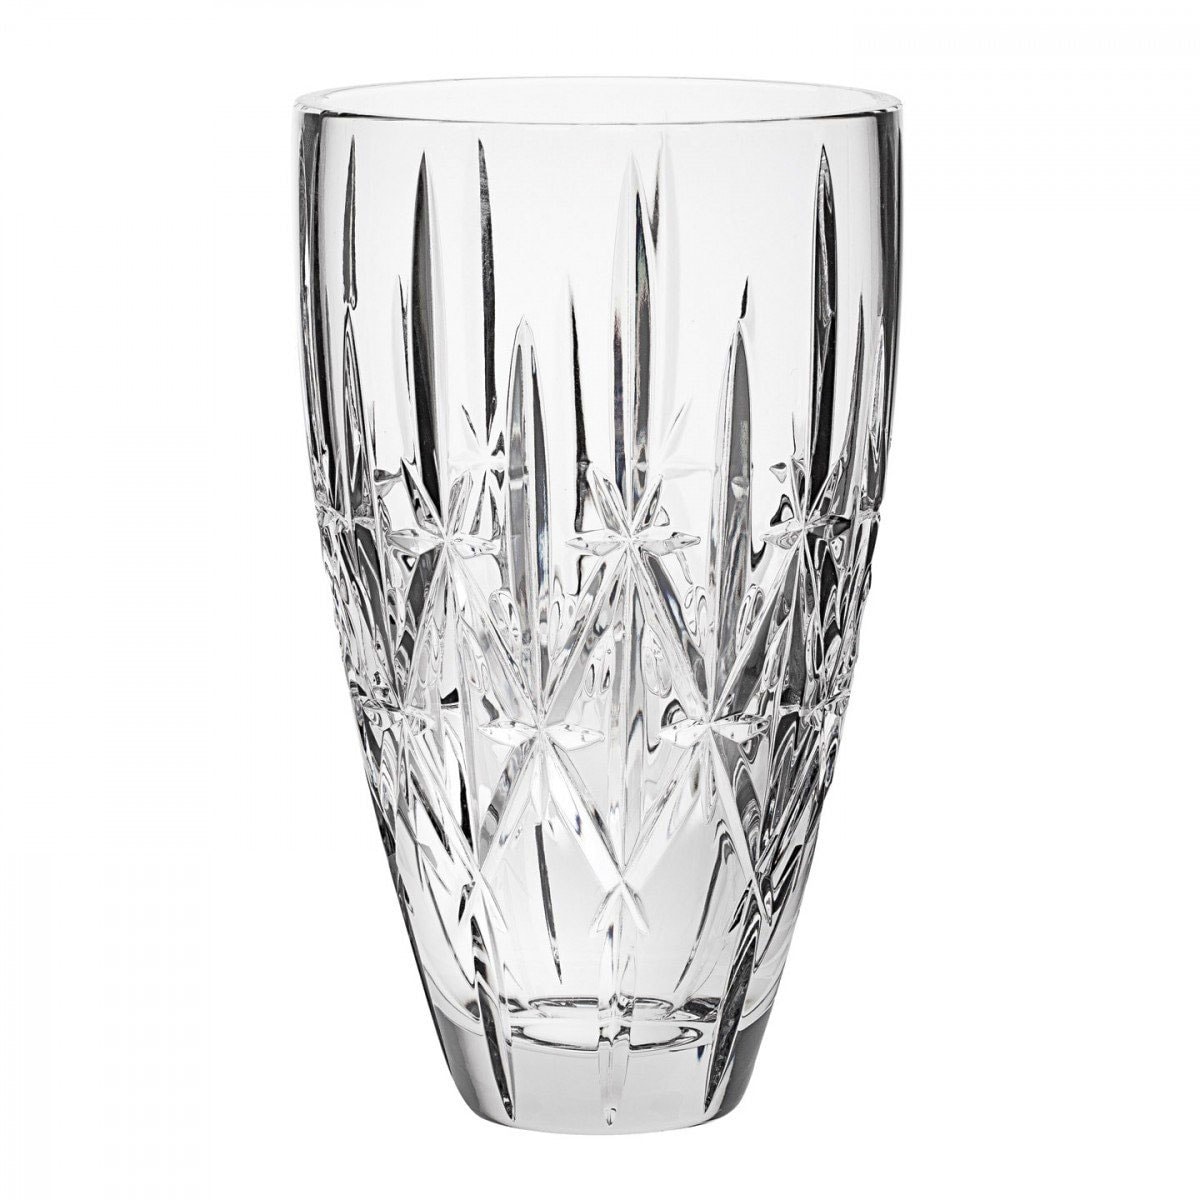 https://ak1.ostkcdn.com/images/products/is/images/direct/e8ad59225330ec530d0d7145985f6cceceb8e85c/Waterford-156611-Sparkle-Vase-9%22.jpg